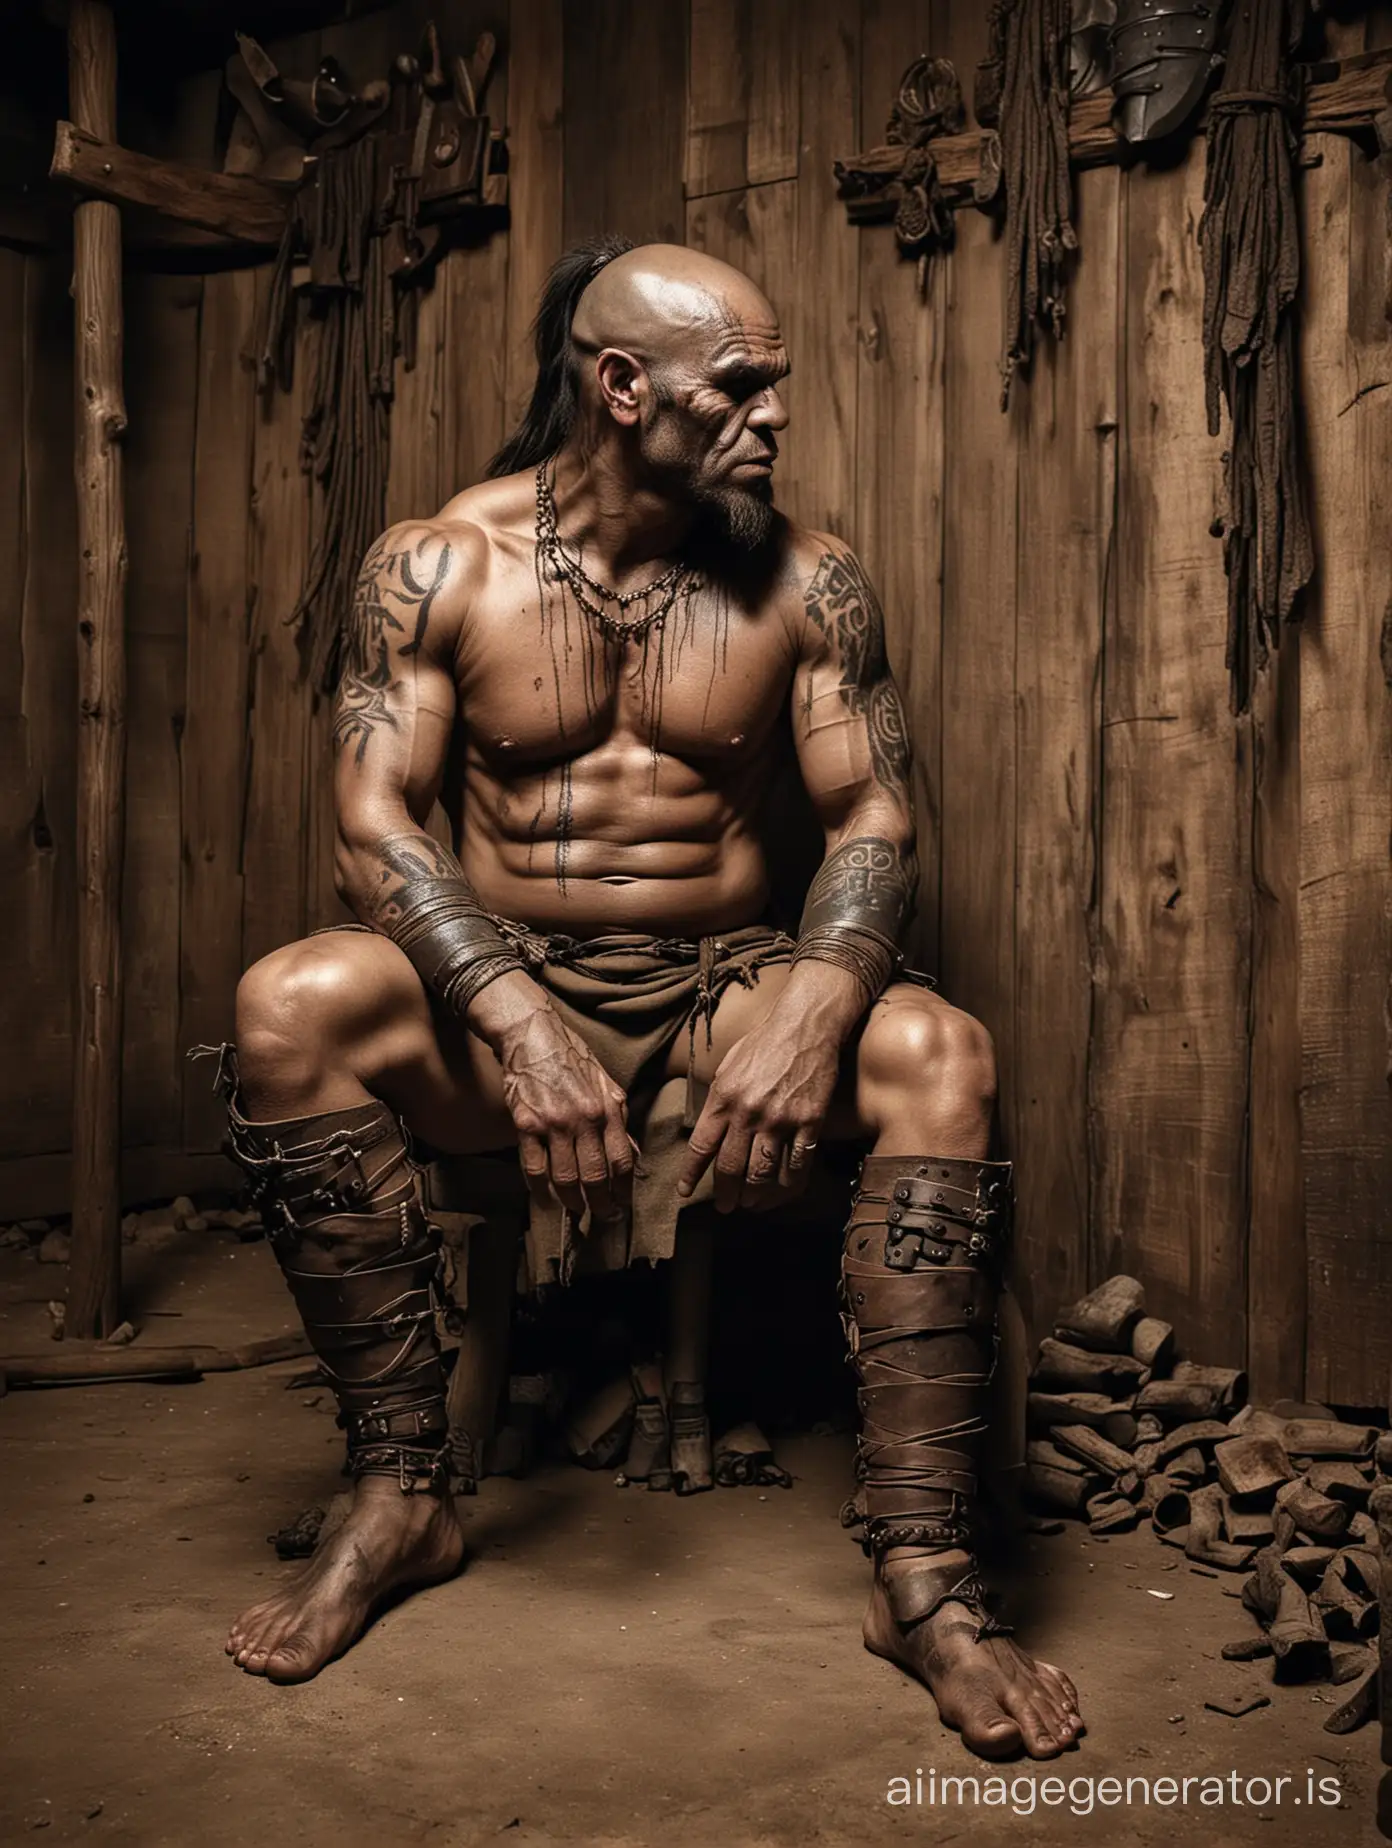 Brooding-Orc-Chieftain-Reflects-in-Gritty-Hut-Ambiance